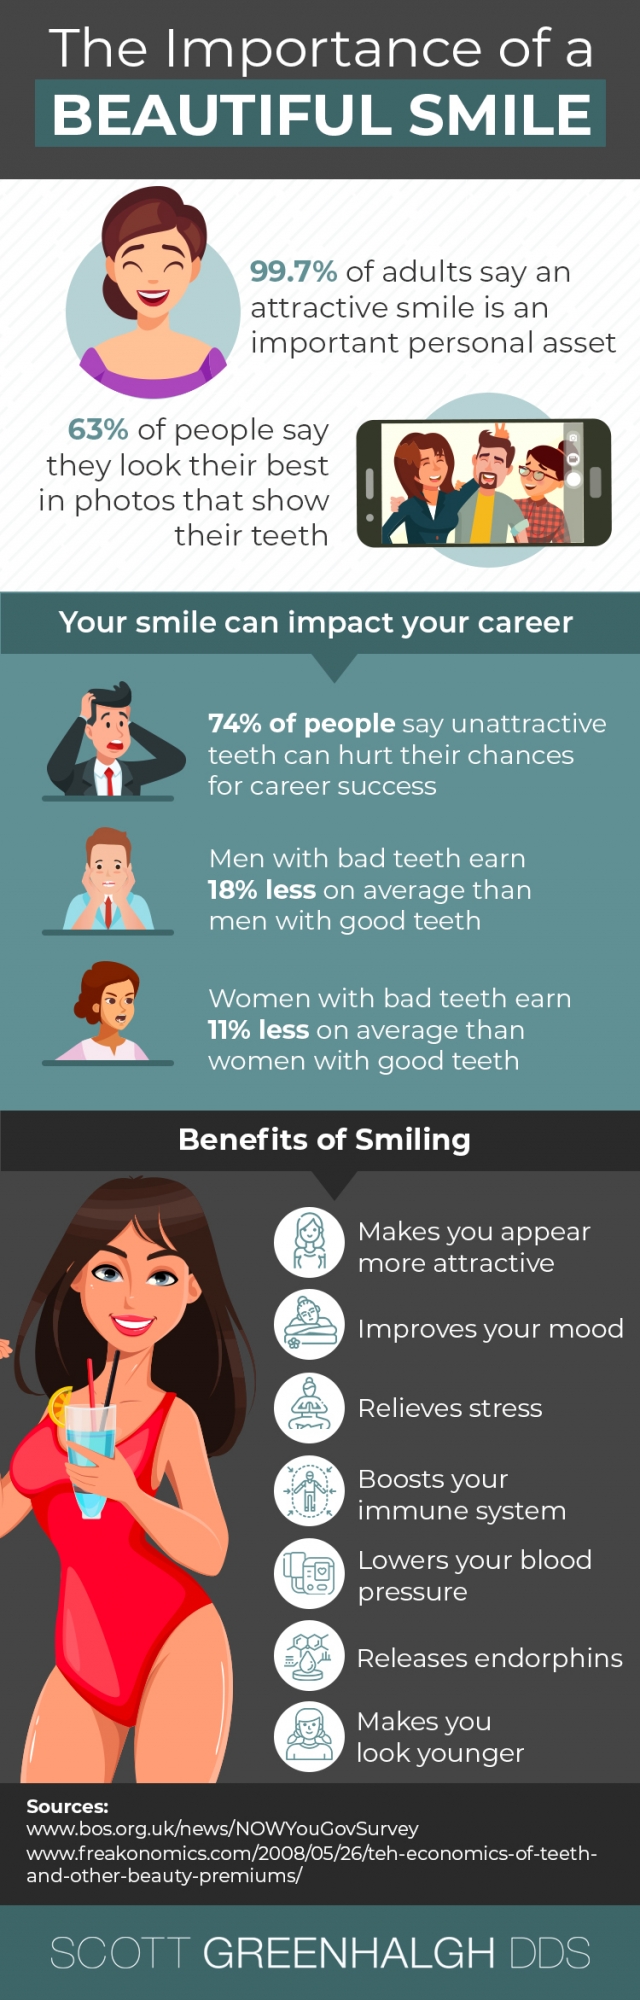 infographic highlighting statistics about the benefits of a beautiful smile